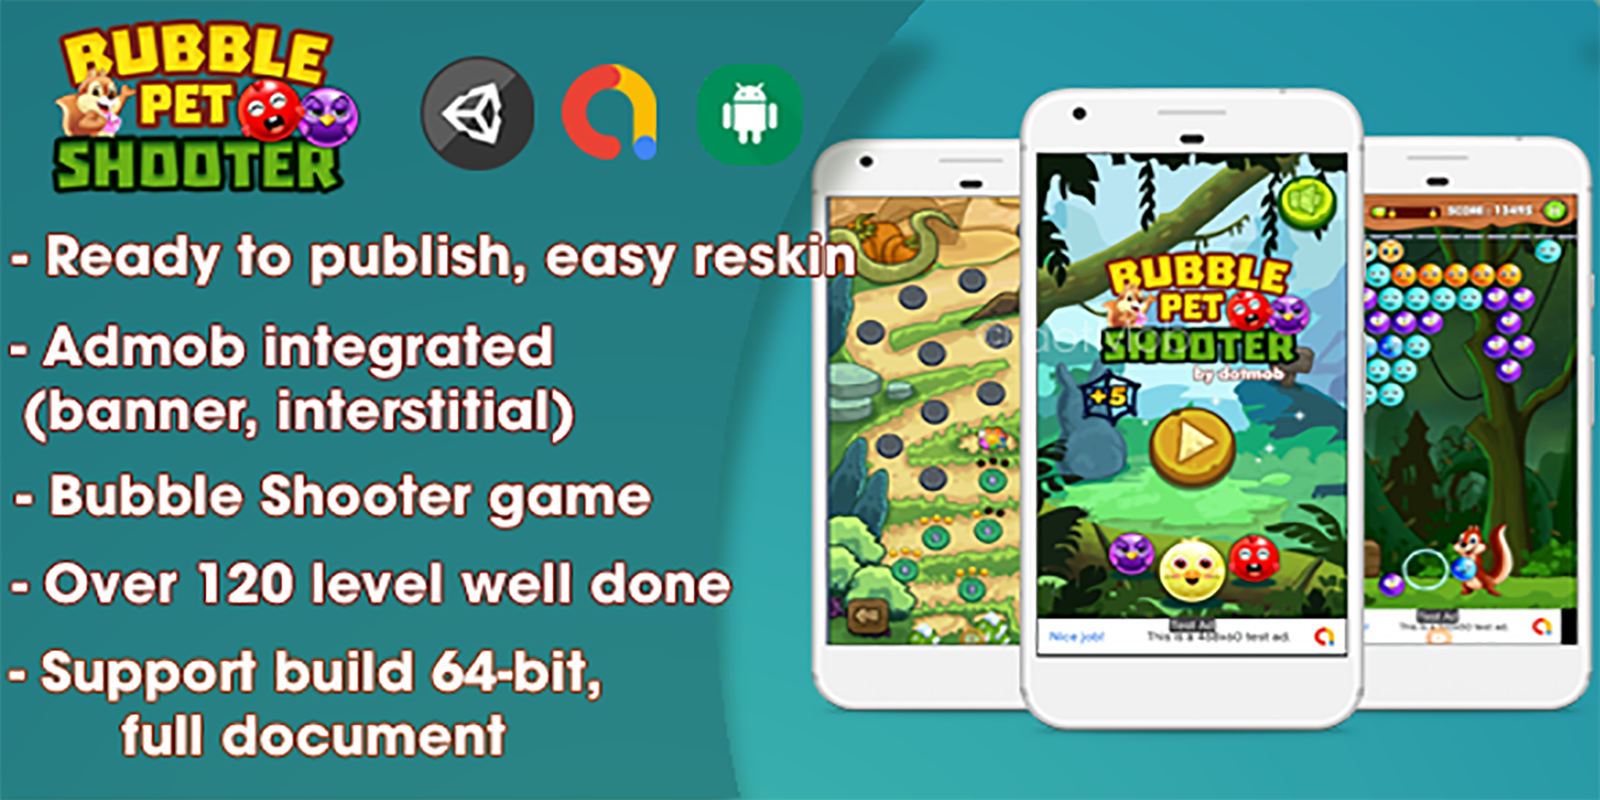 Bubble Shooter Pet - Projet complet Unity (Android + iOS + AdMob)